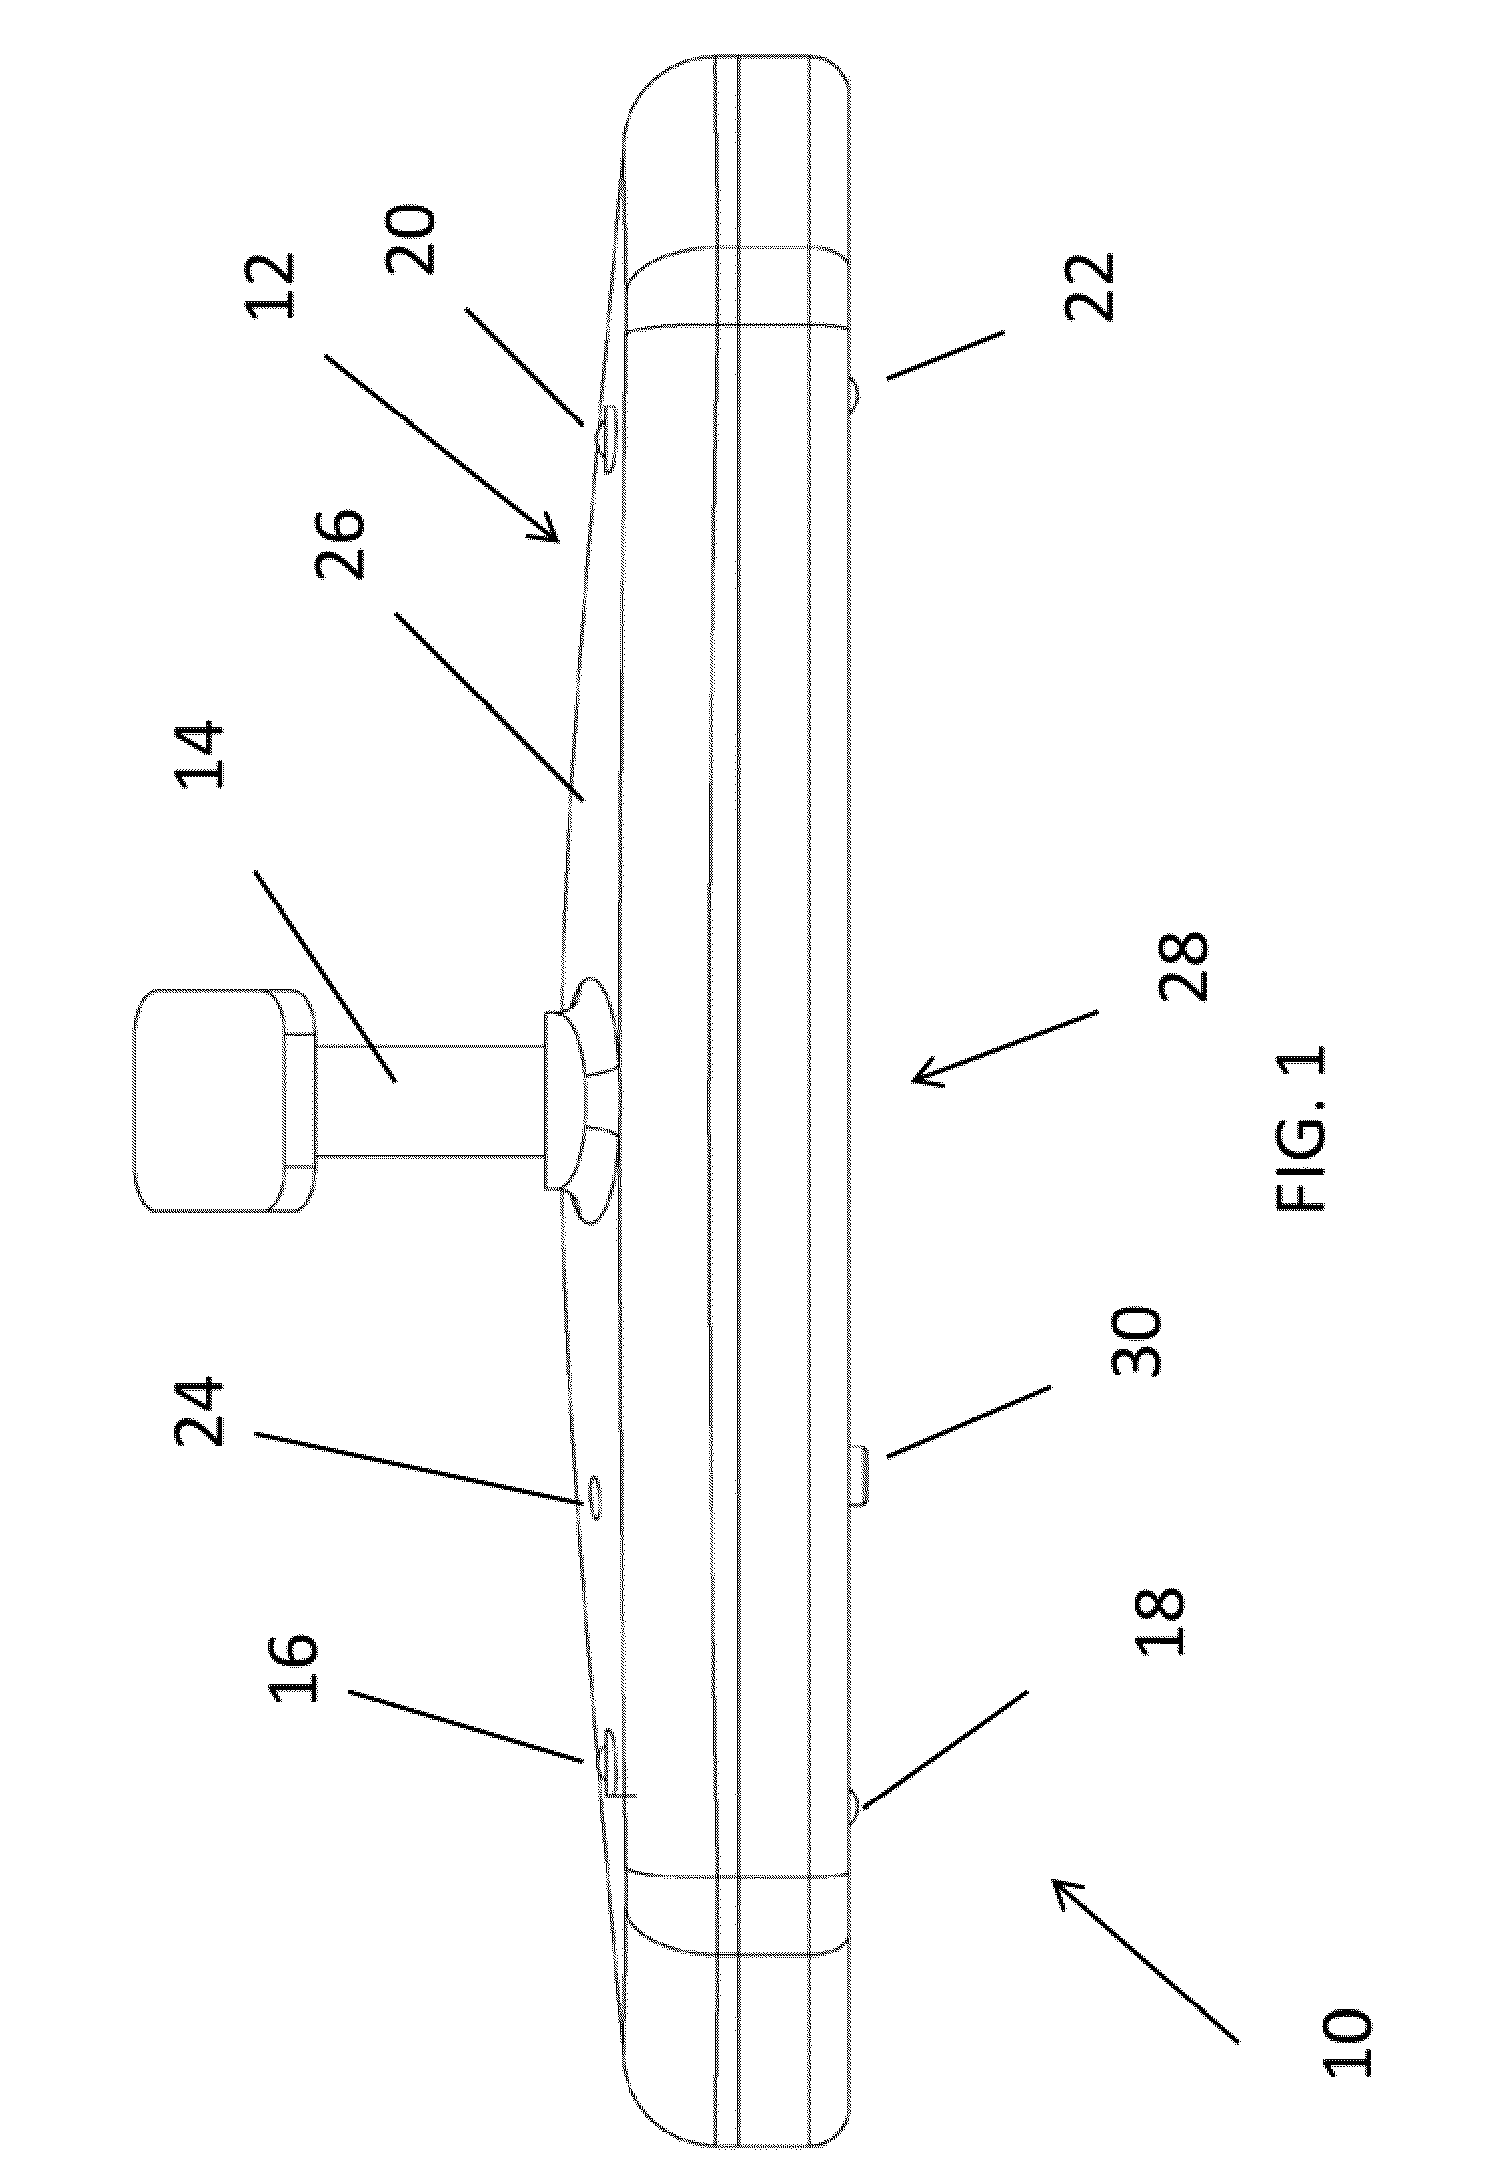 Automobile Rear View Mirror Assembly for Housing a Camera System and a Retractable Universal Mount